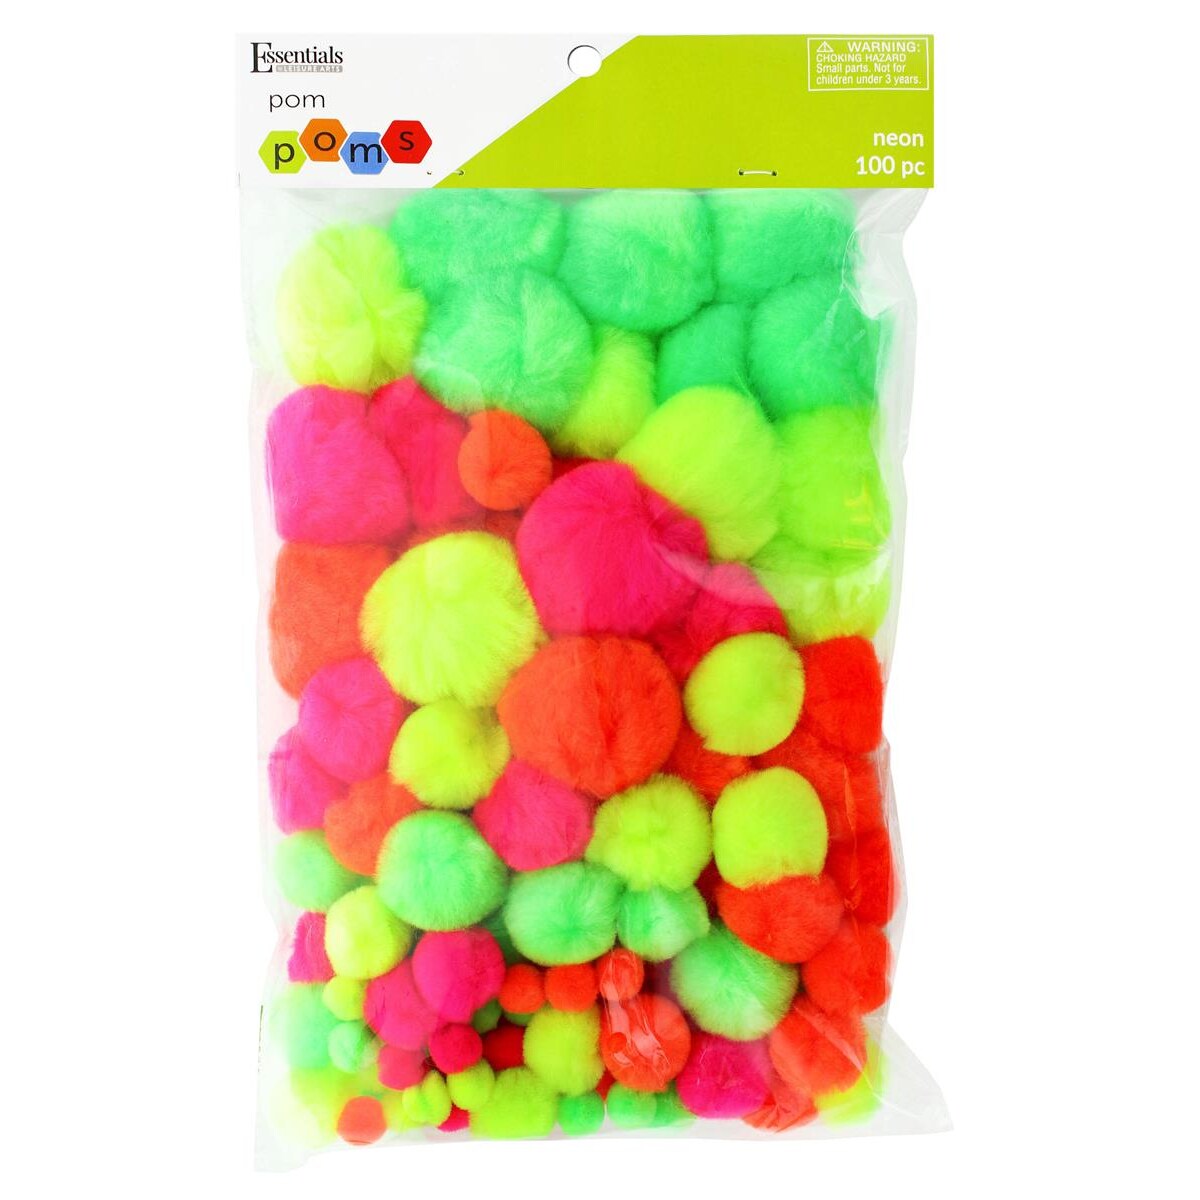 Essentials by Leisure Arts Pom Poms, Neon -Assorted Sizes, 100 Pieces per Pack